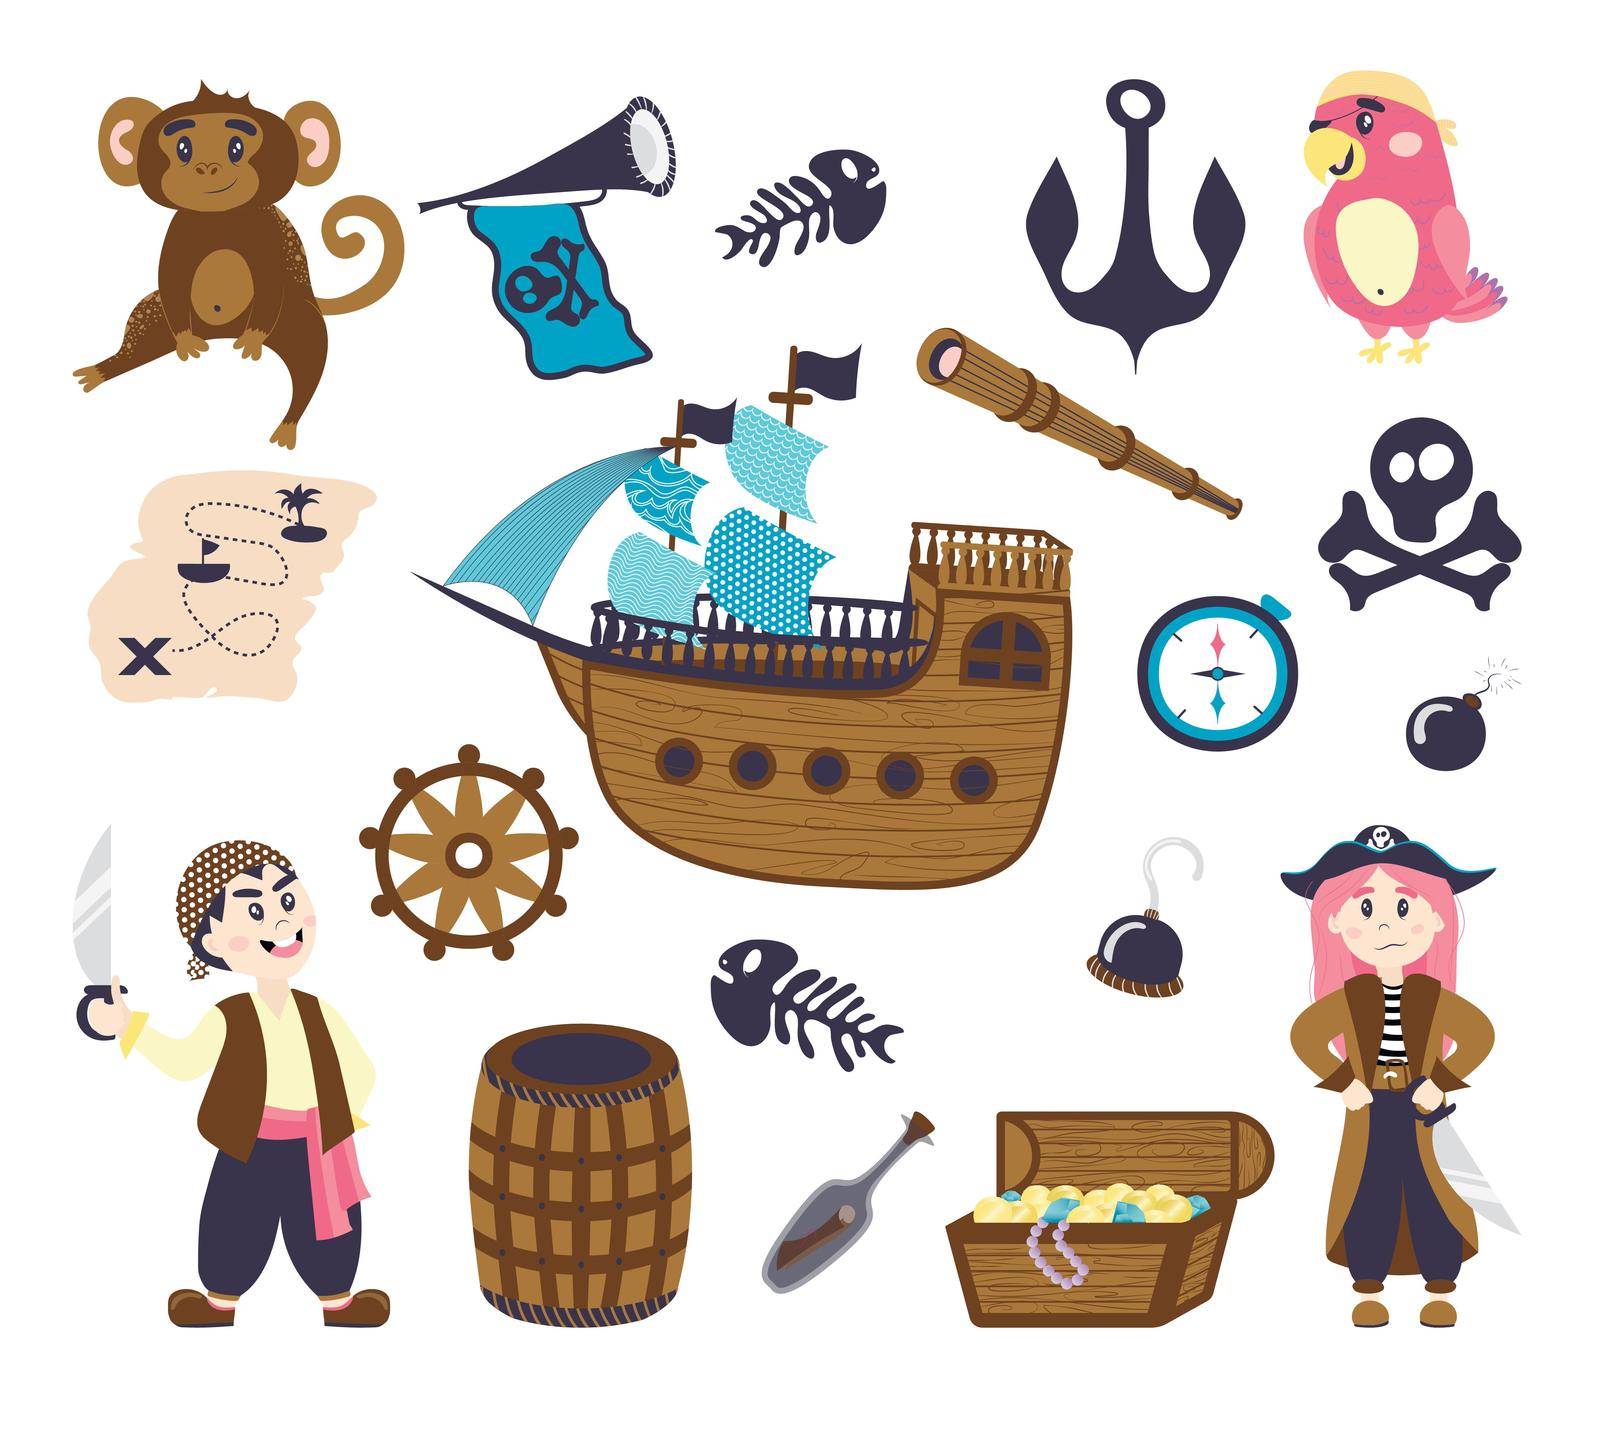 A set of pirate items, a ship, a pirate girl and a boy, a parrot in a bandana, a monkey, a skull with bones, a fish skeleton, a telescope, a compass, a steering wheel, a hook, a bomb, a smoking pipe,